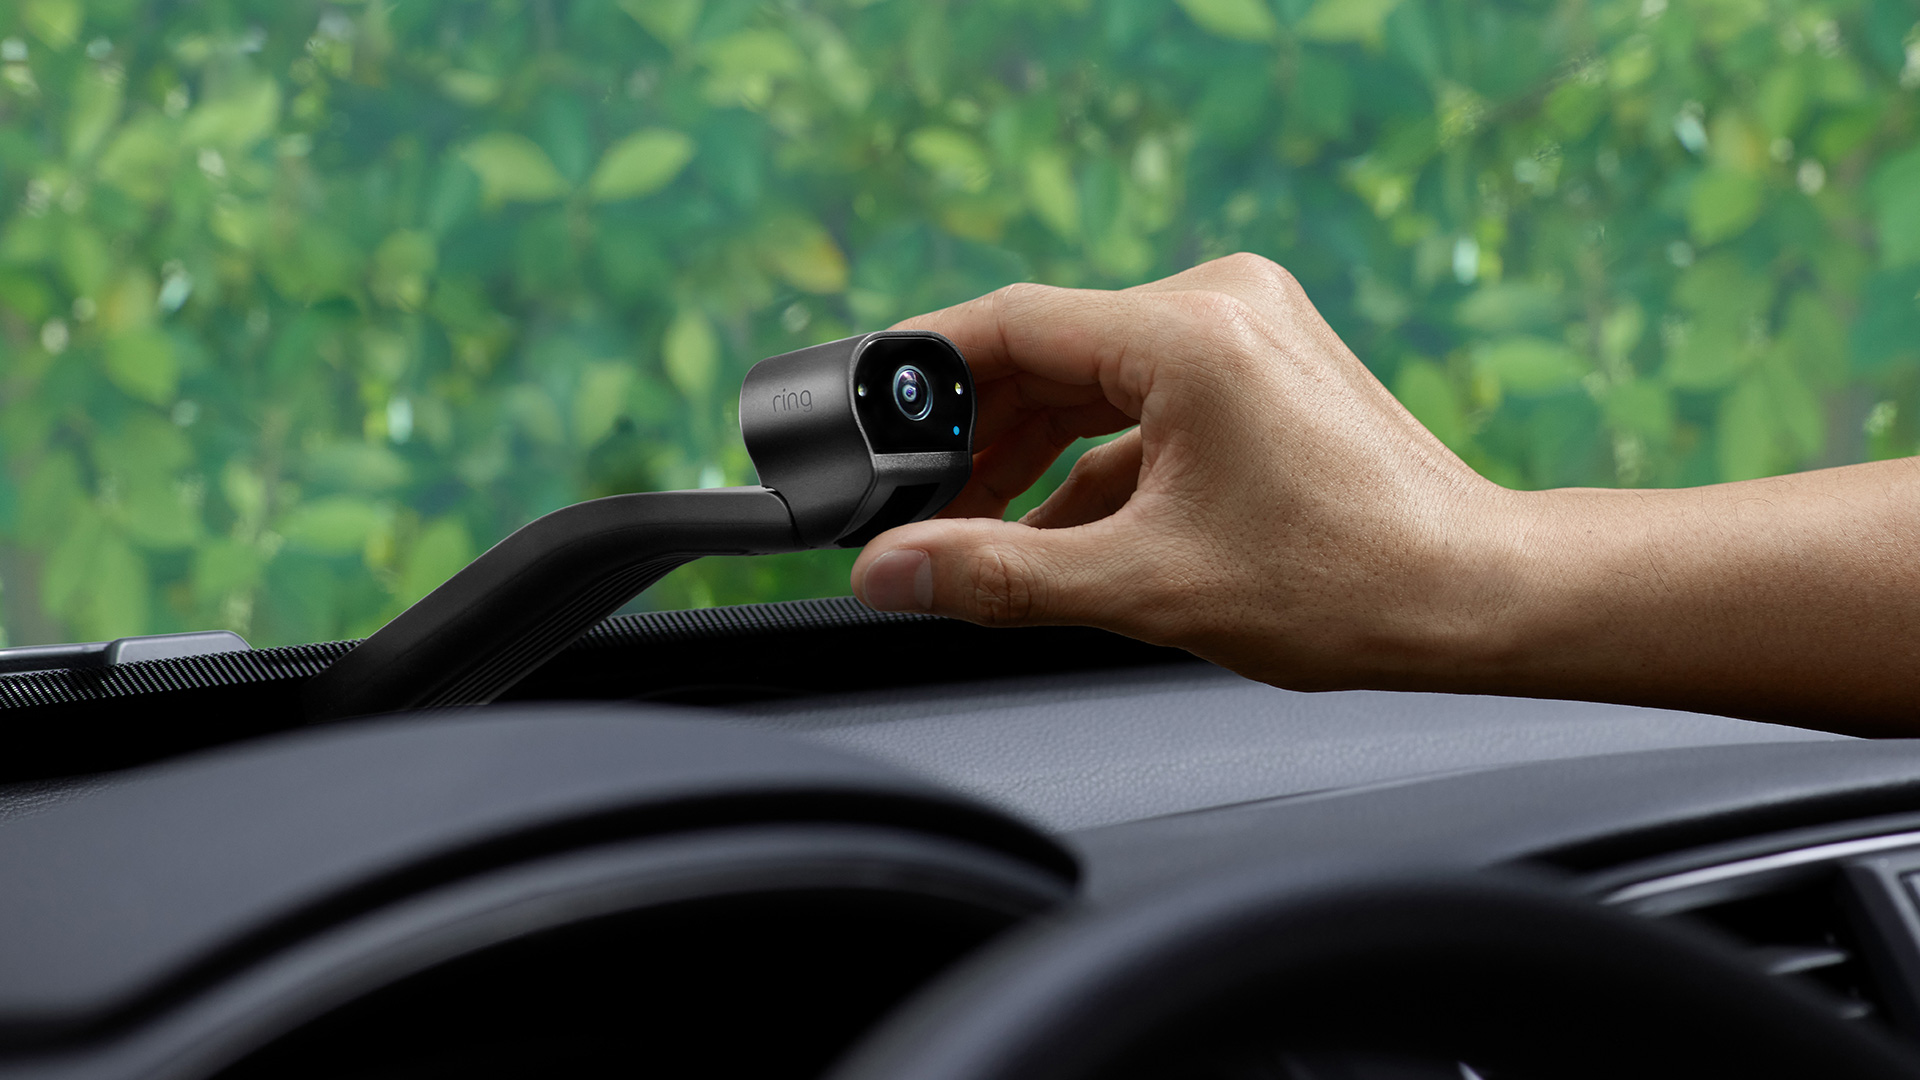 Ring has yet another place for you to stick a camera: In your car